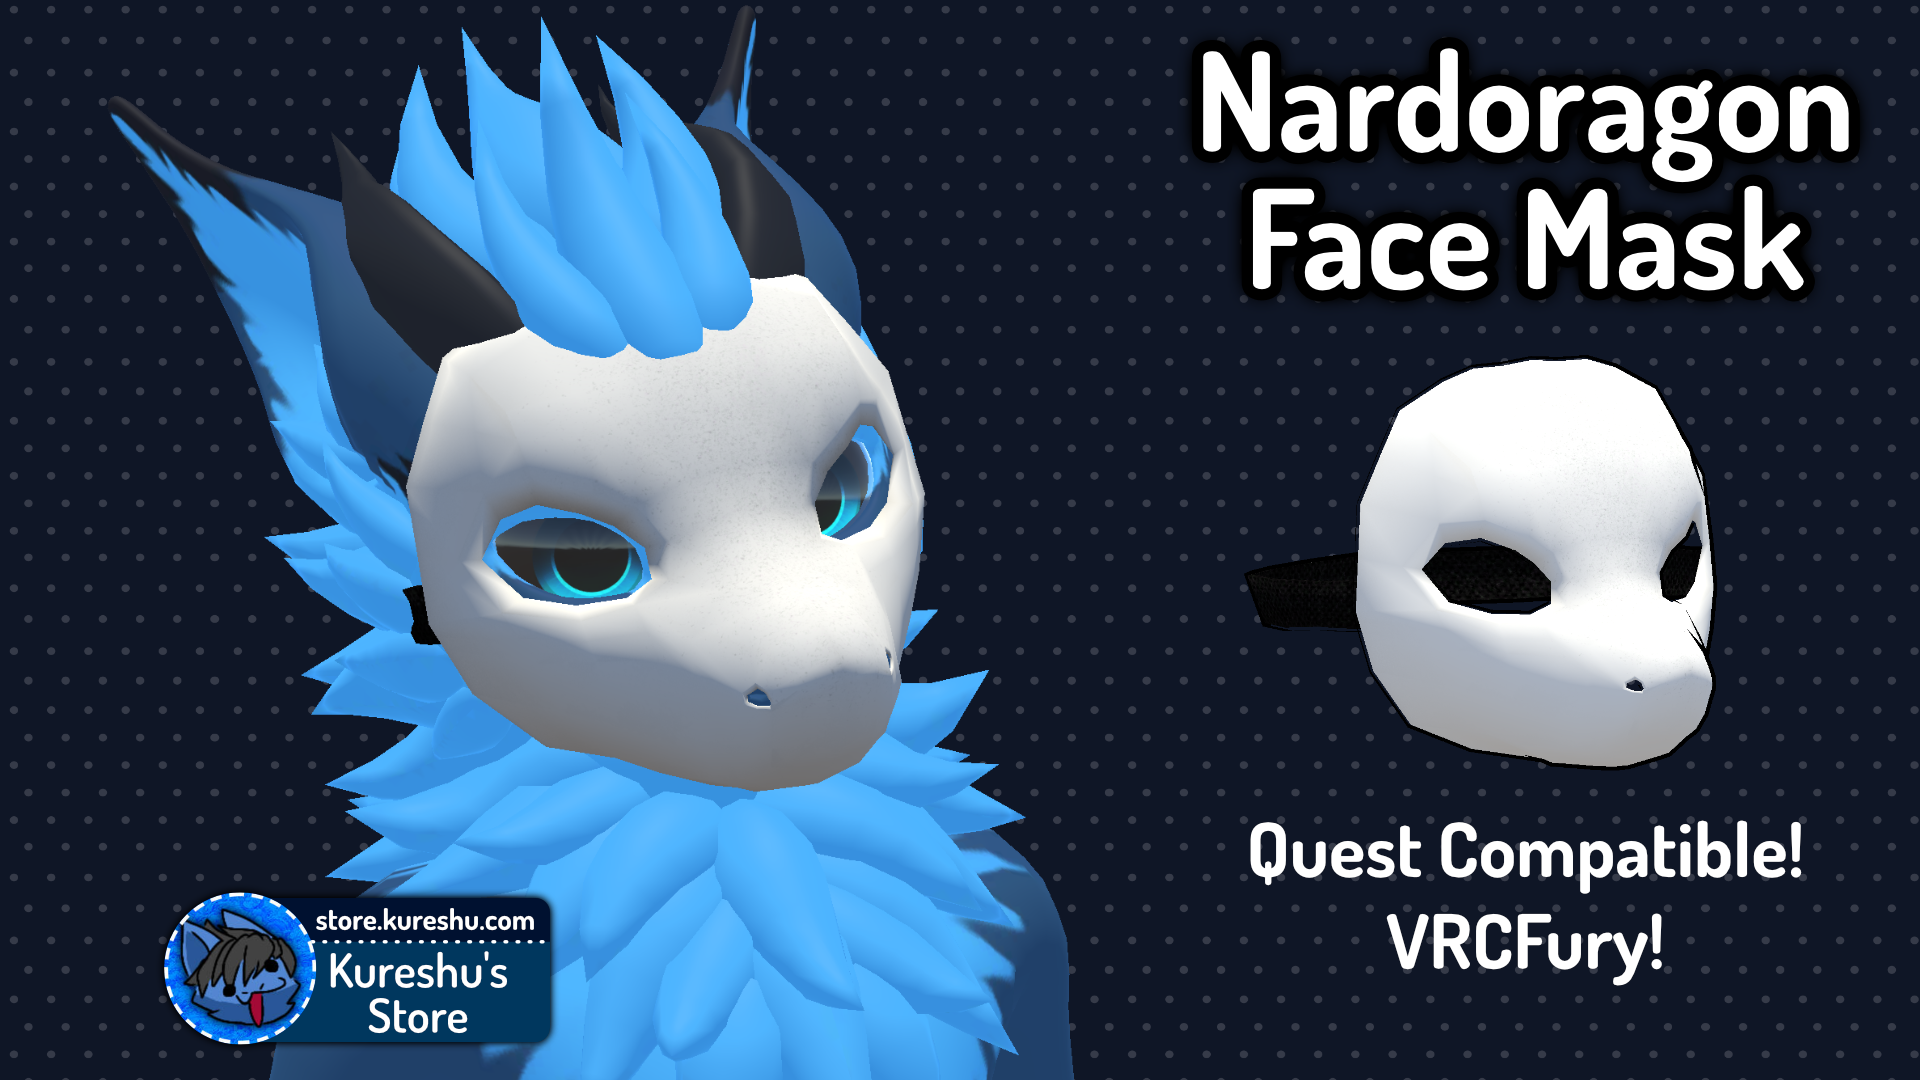 Nardoragon Face Mask (VRChat PC and Quest Compatible)